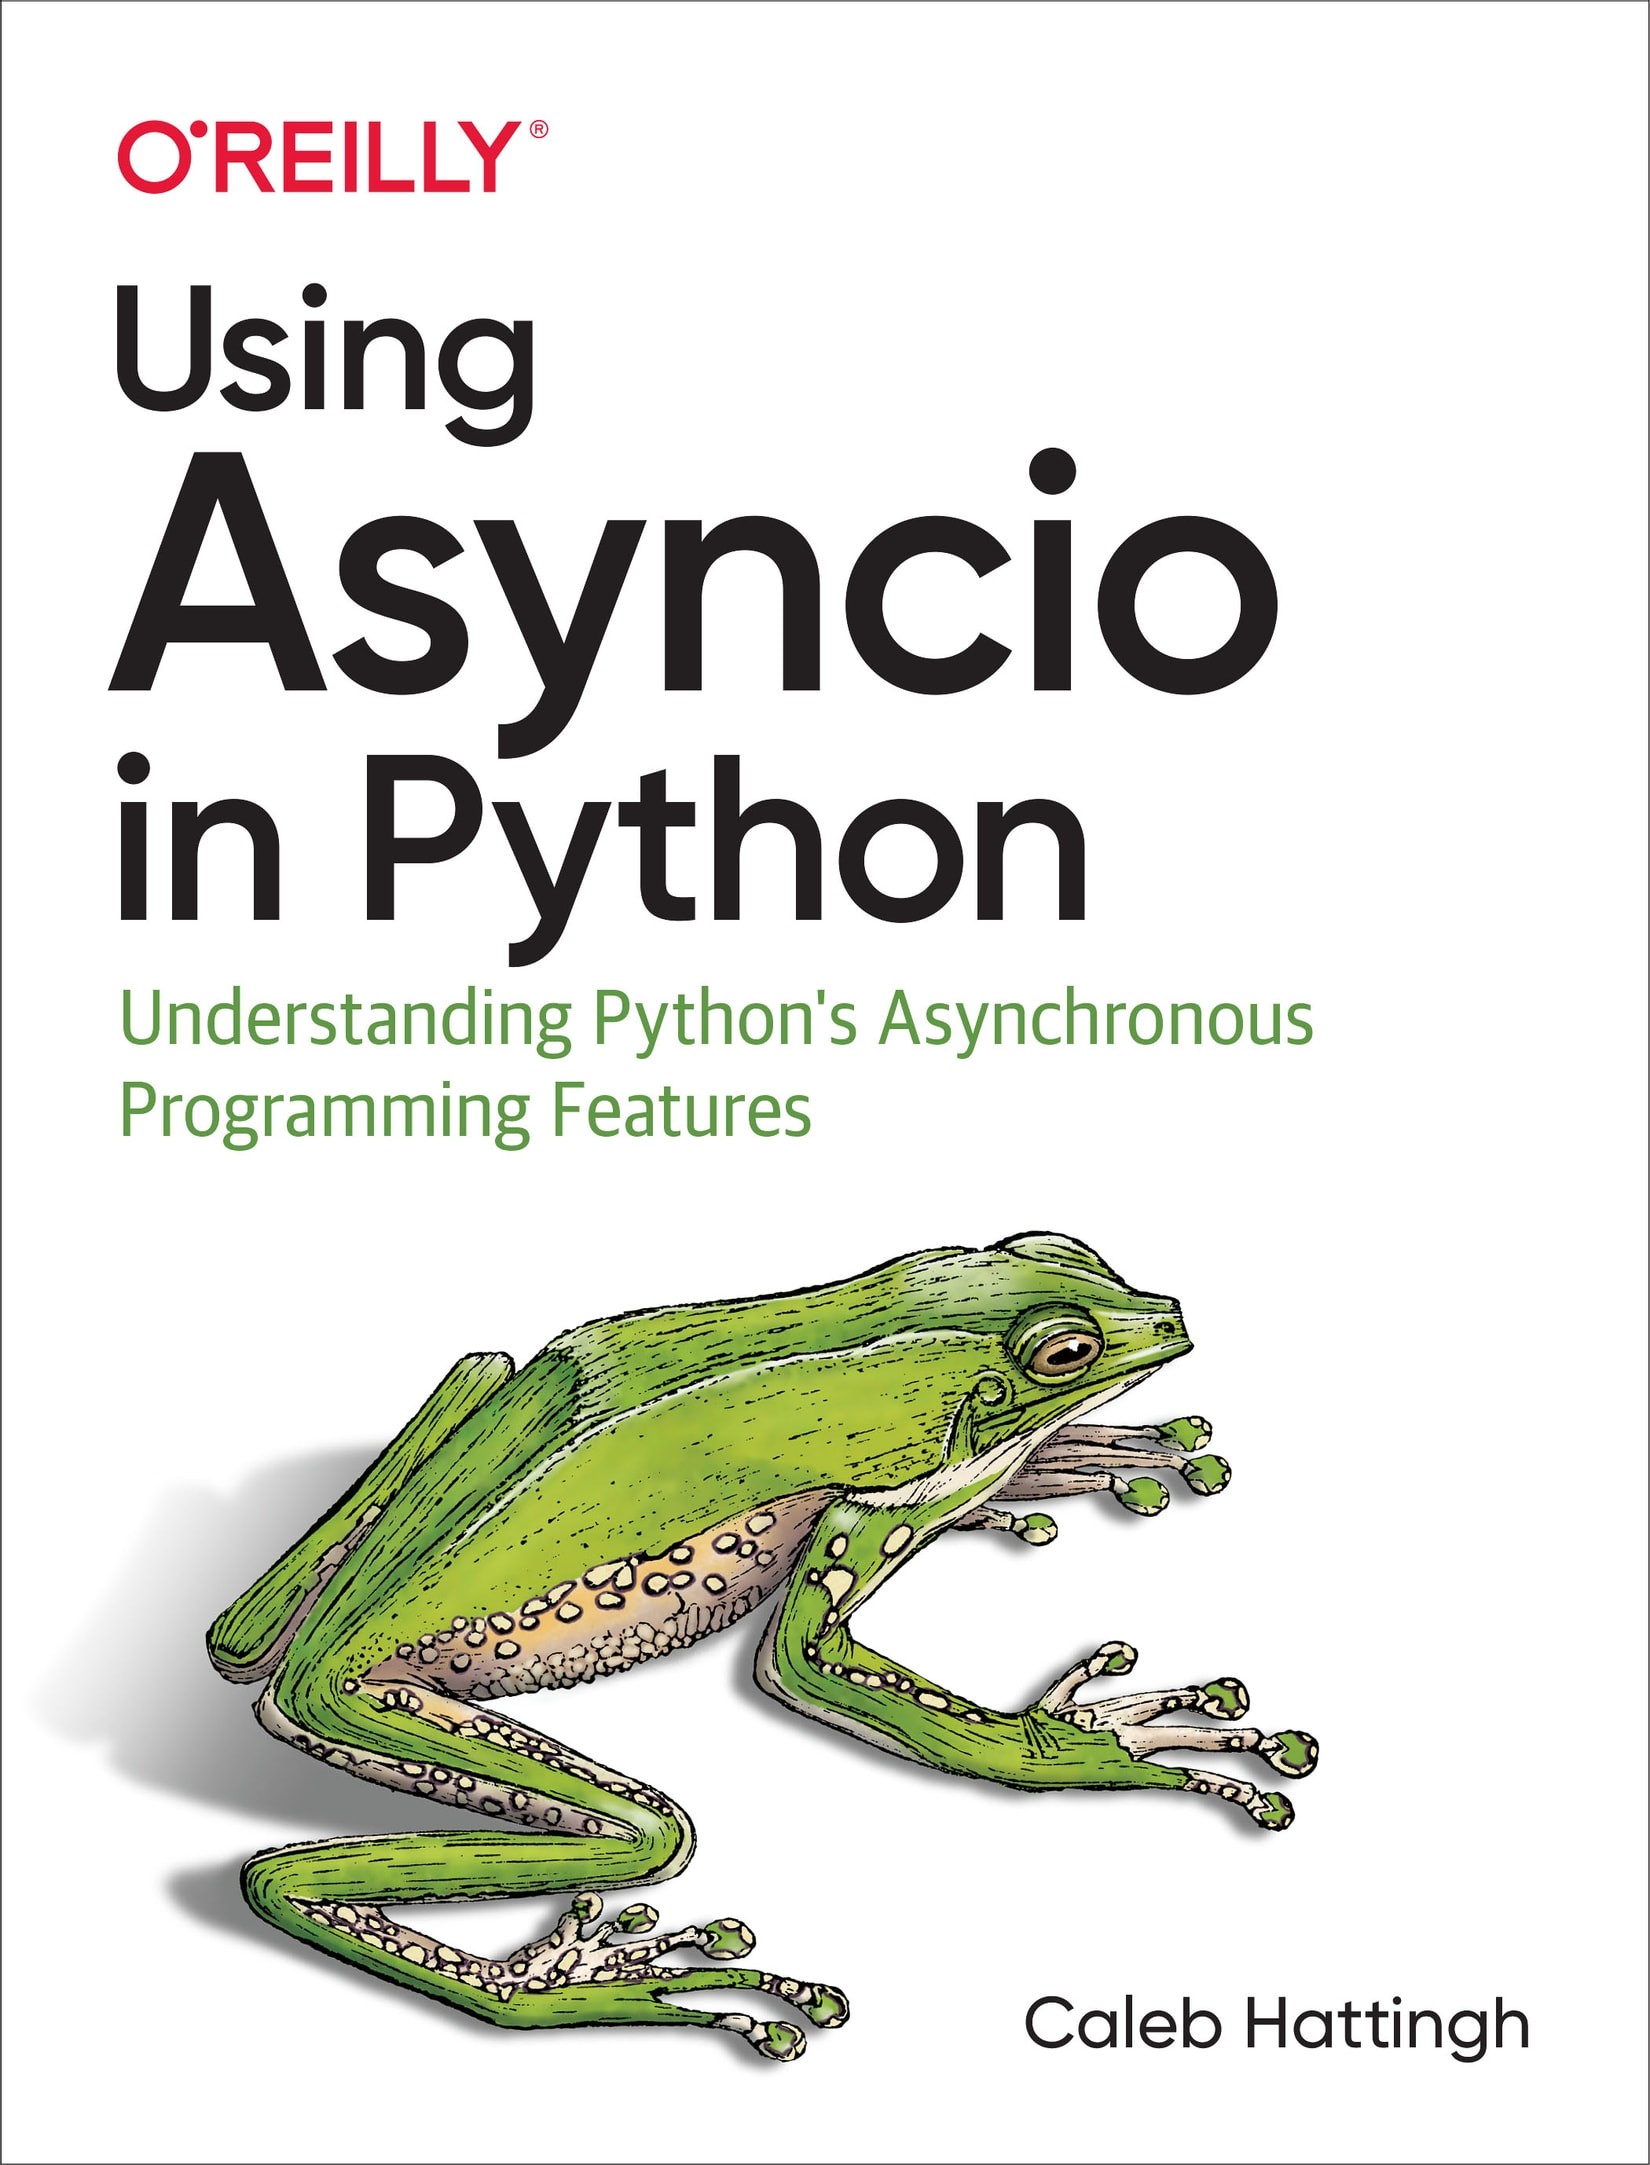 using Asyncio in Python: Understanding Python's Asynchronous Programming Features